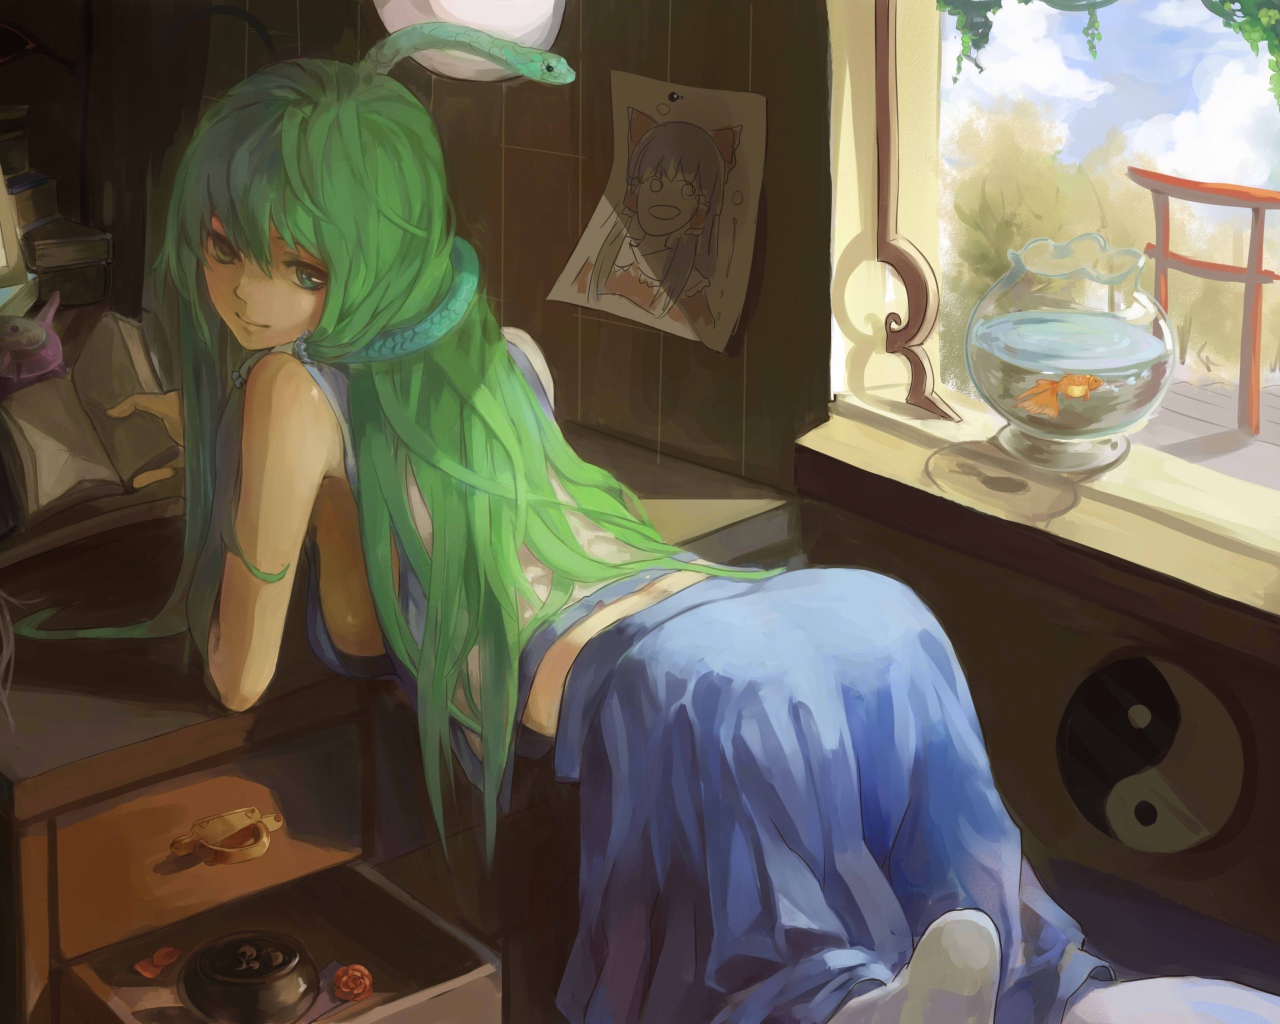 Anime girl Touhou Project